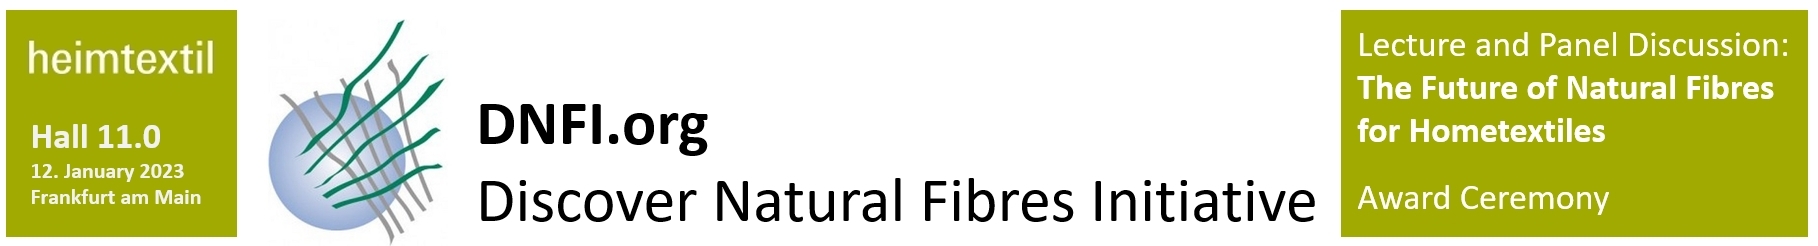 The Future of Natural Fibres for Hometextiles